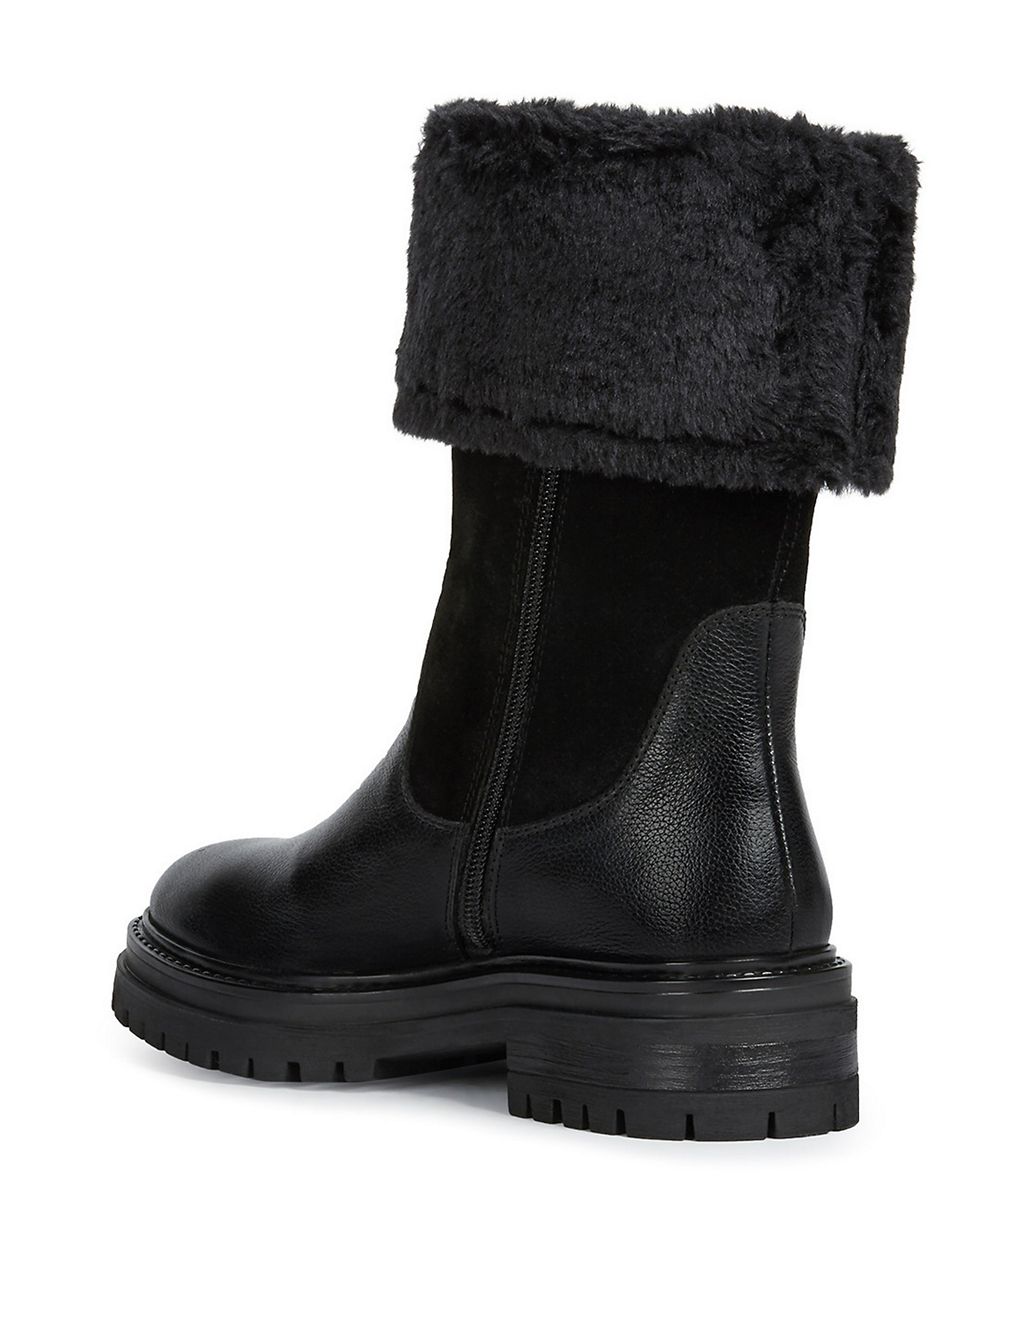 Leather Faux Fur Chunky Winter Boots | Geox | M&S